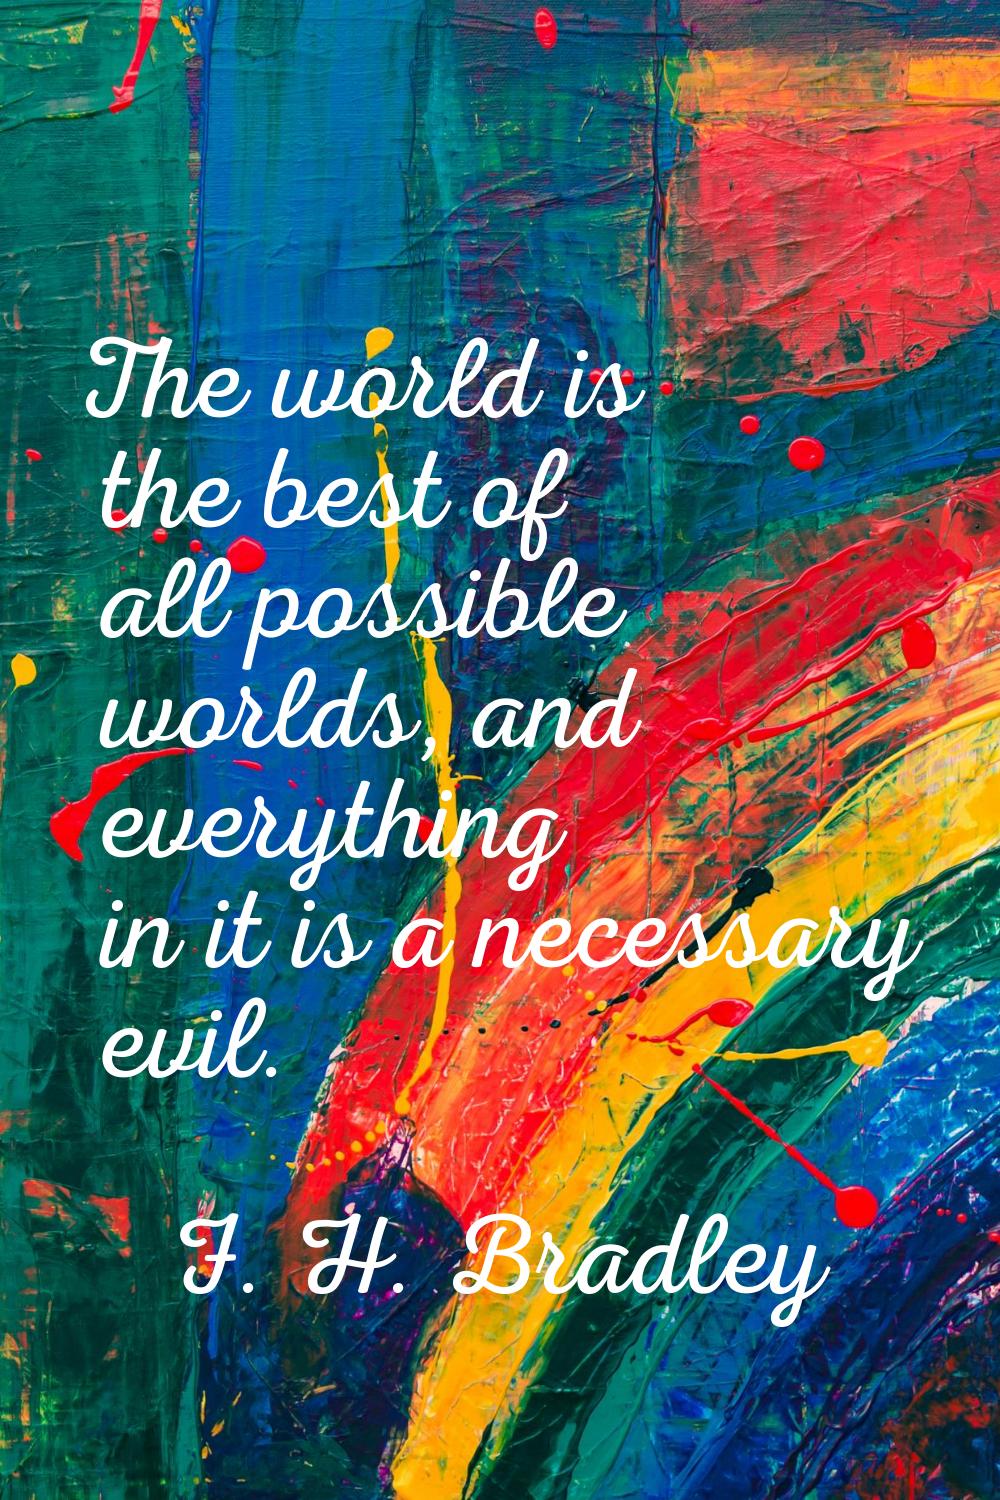 The world is the best of all possible worlds, and everything in it is a necessary evil.